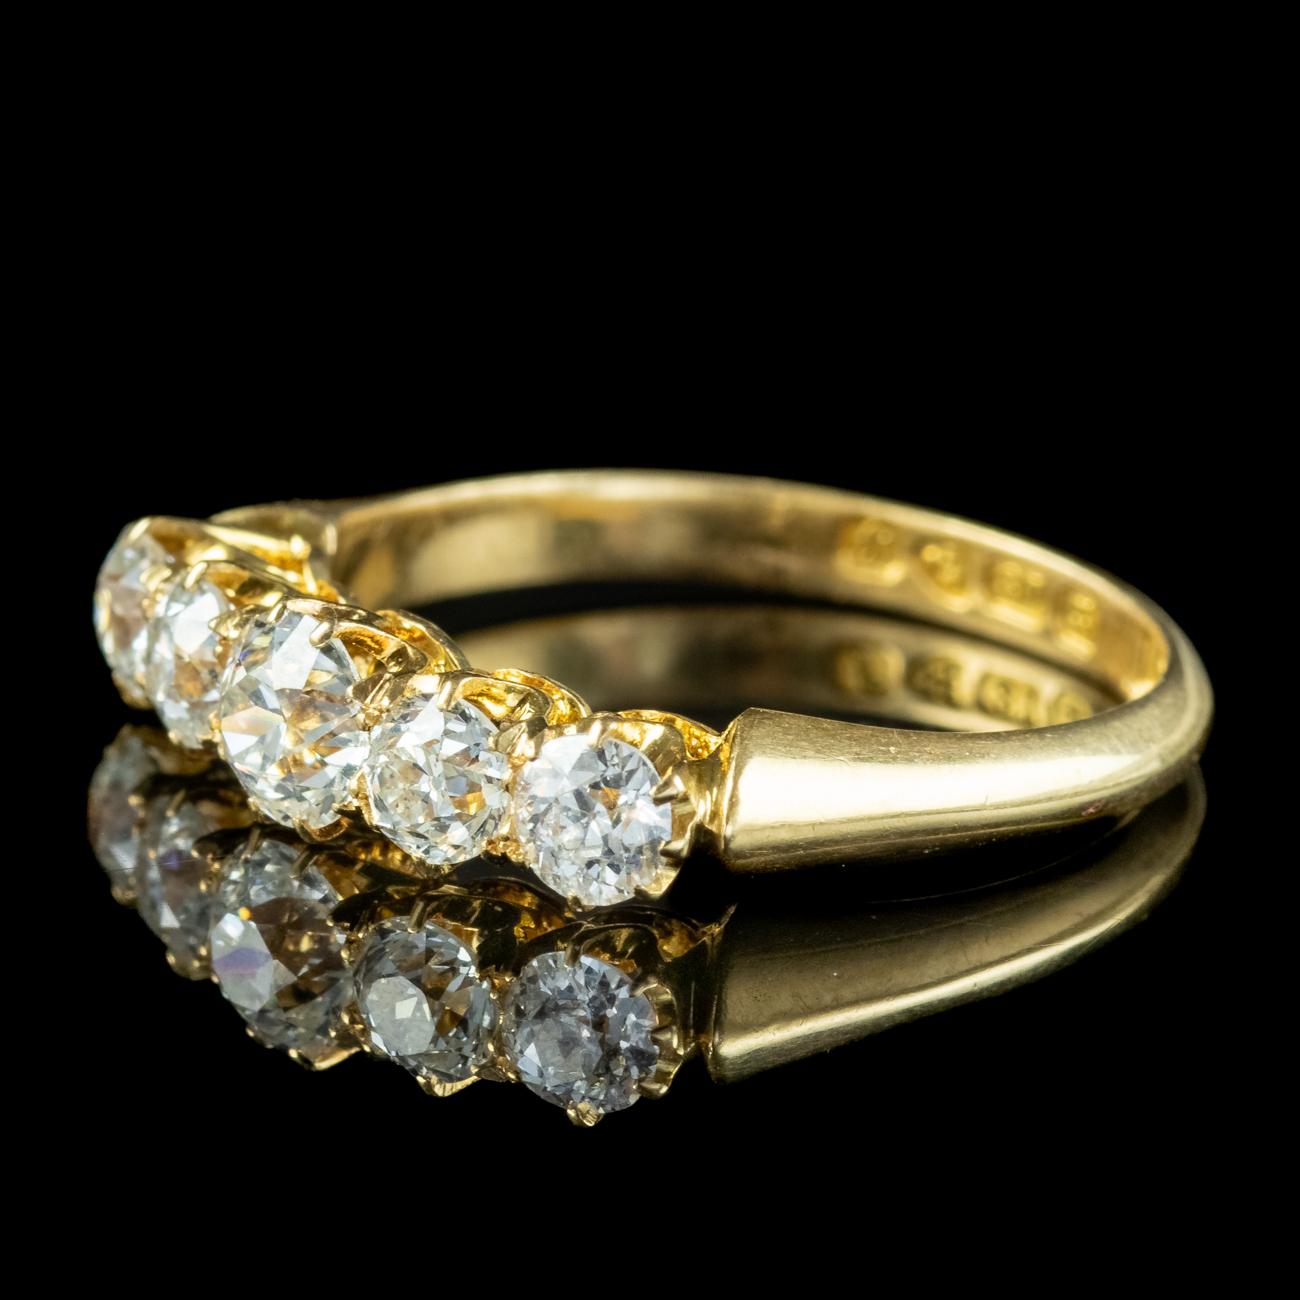 Old European Cut Antique Edwardian Diamond Five Stone Ring 1.4ct Diamond Dated 1909 For Sale